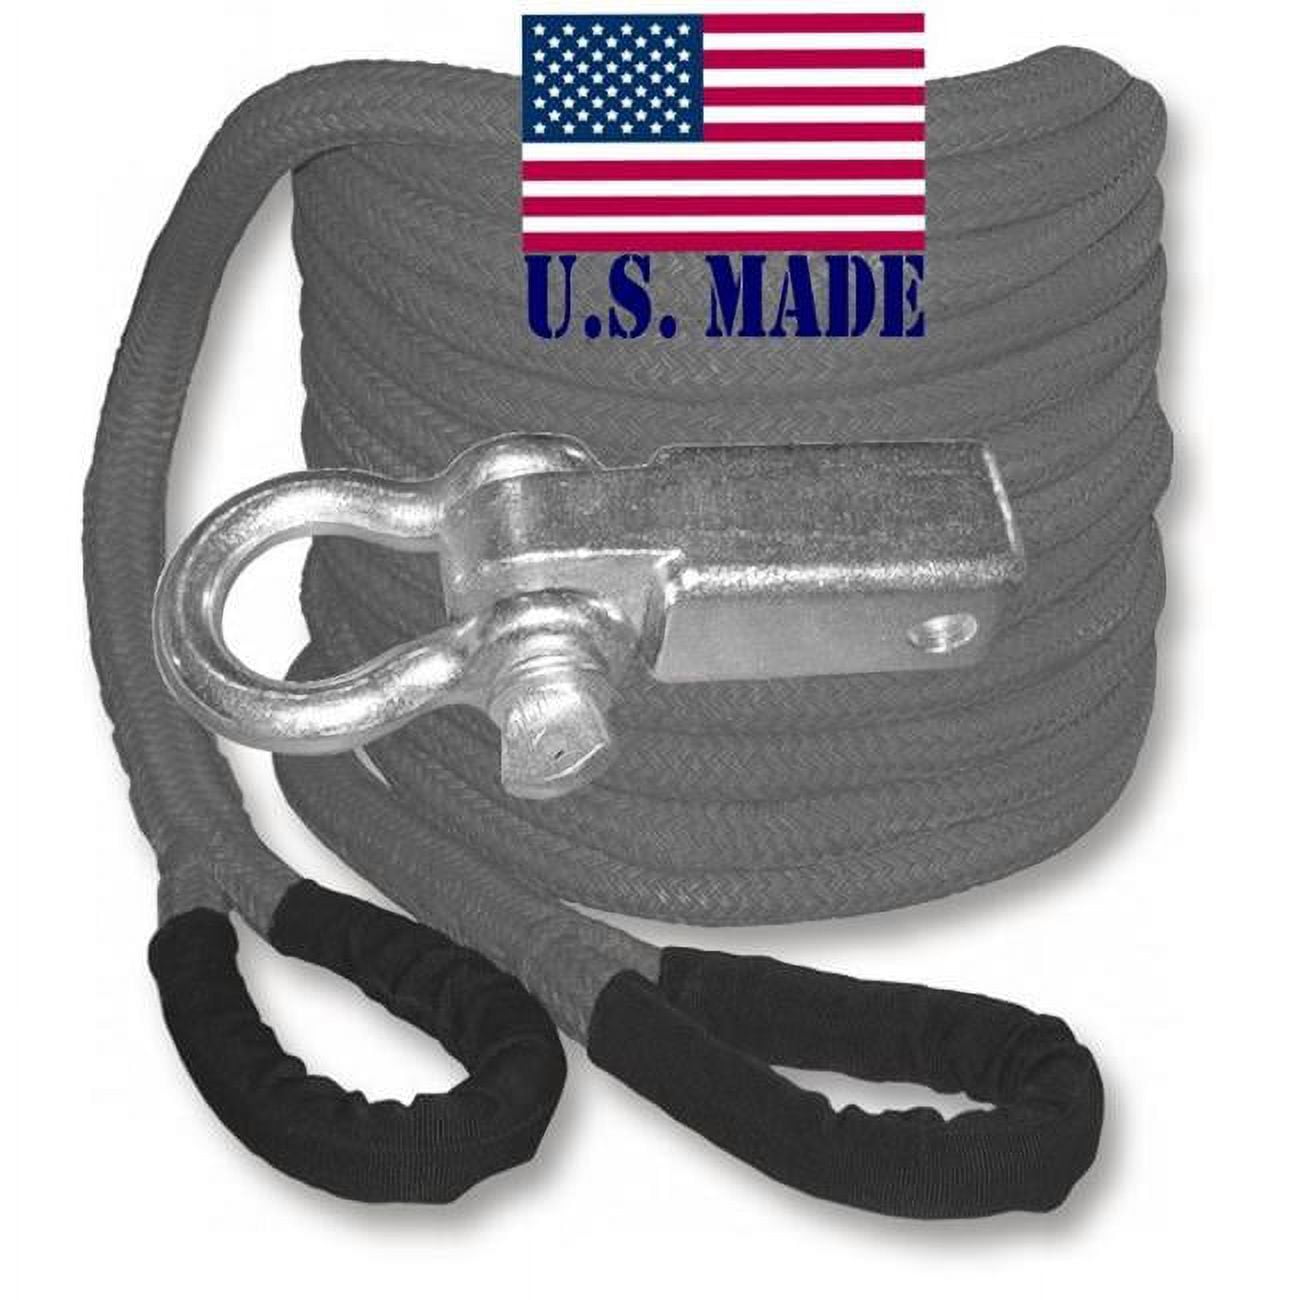 U.s. Made "gunmetal Grey" Safe-t-line® Kinetic Recovery (snatch) Rope - 1 Inch X 30 Ft With Receiver Shackle Bracket (4x4 Vehicle Recovery)